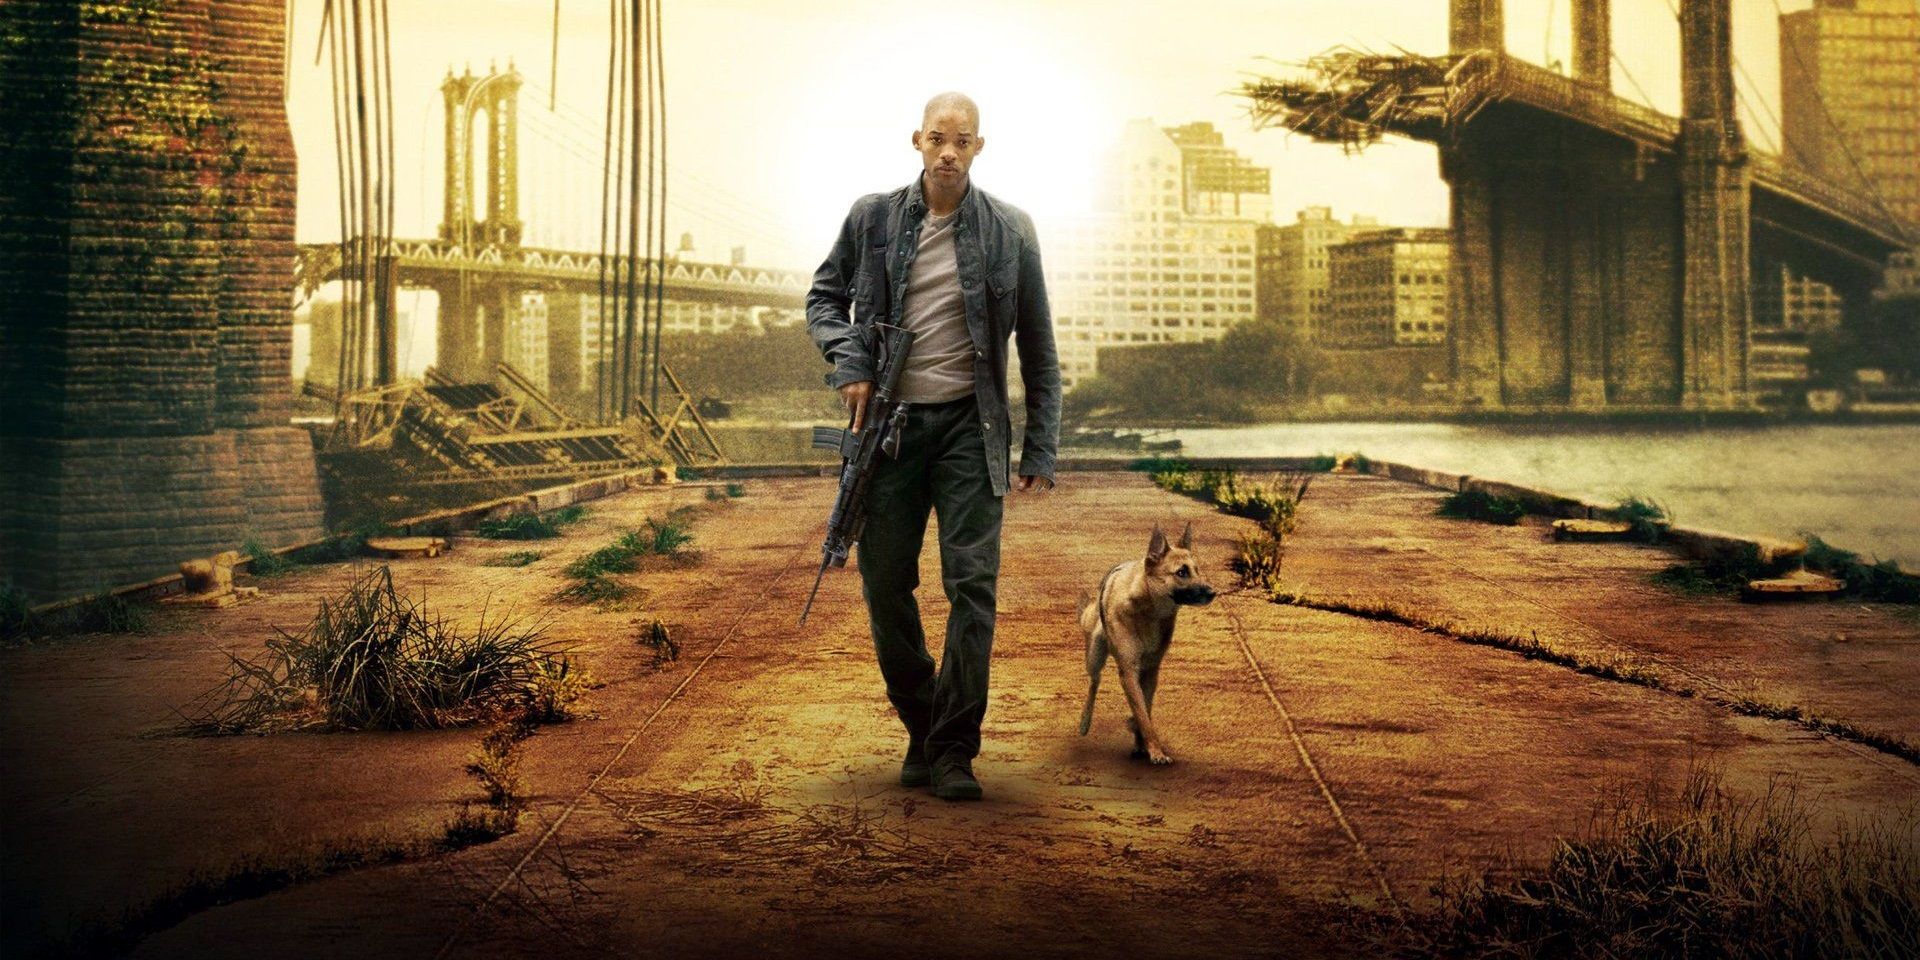 Will Smith and his dog on the poster for I Am Legend